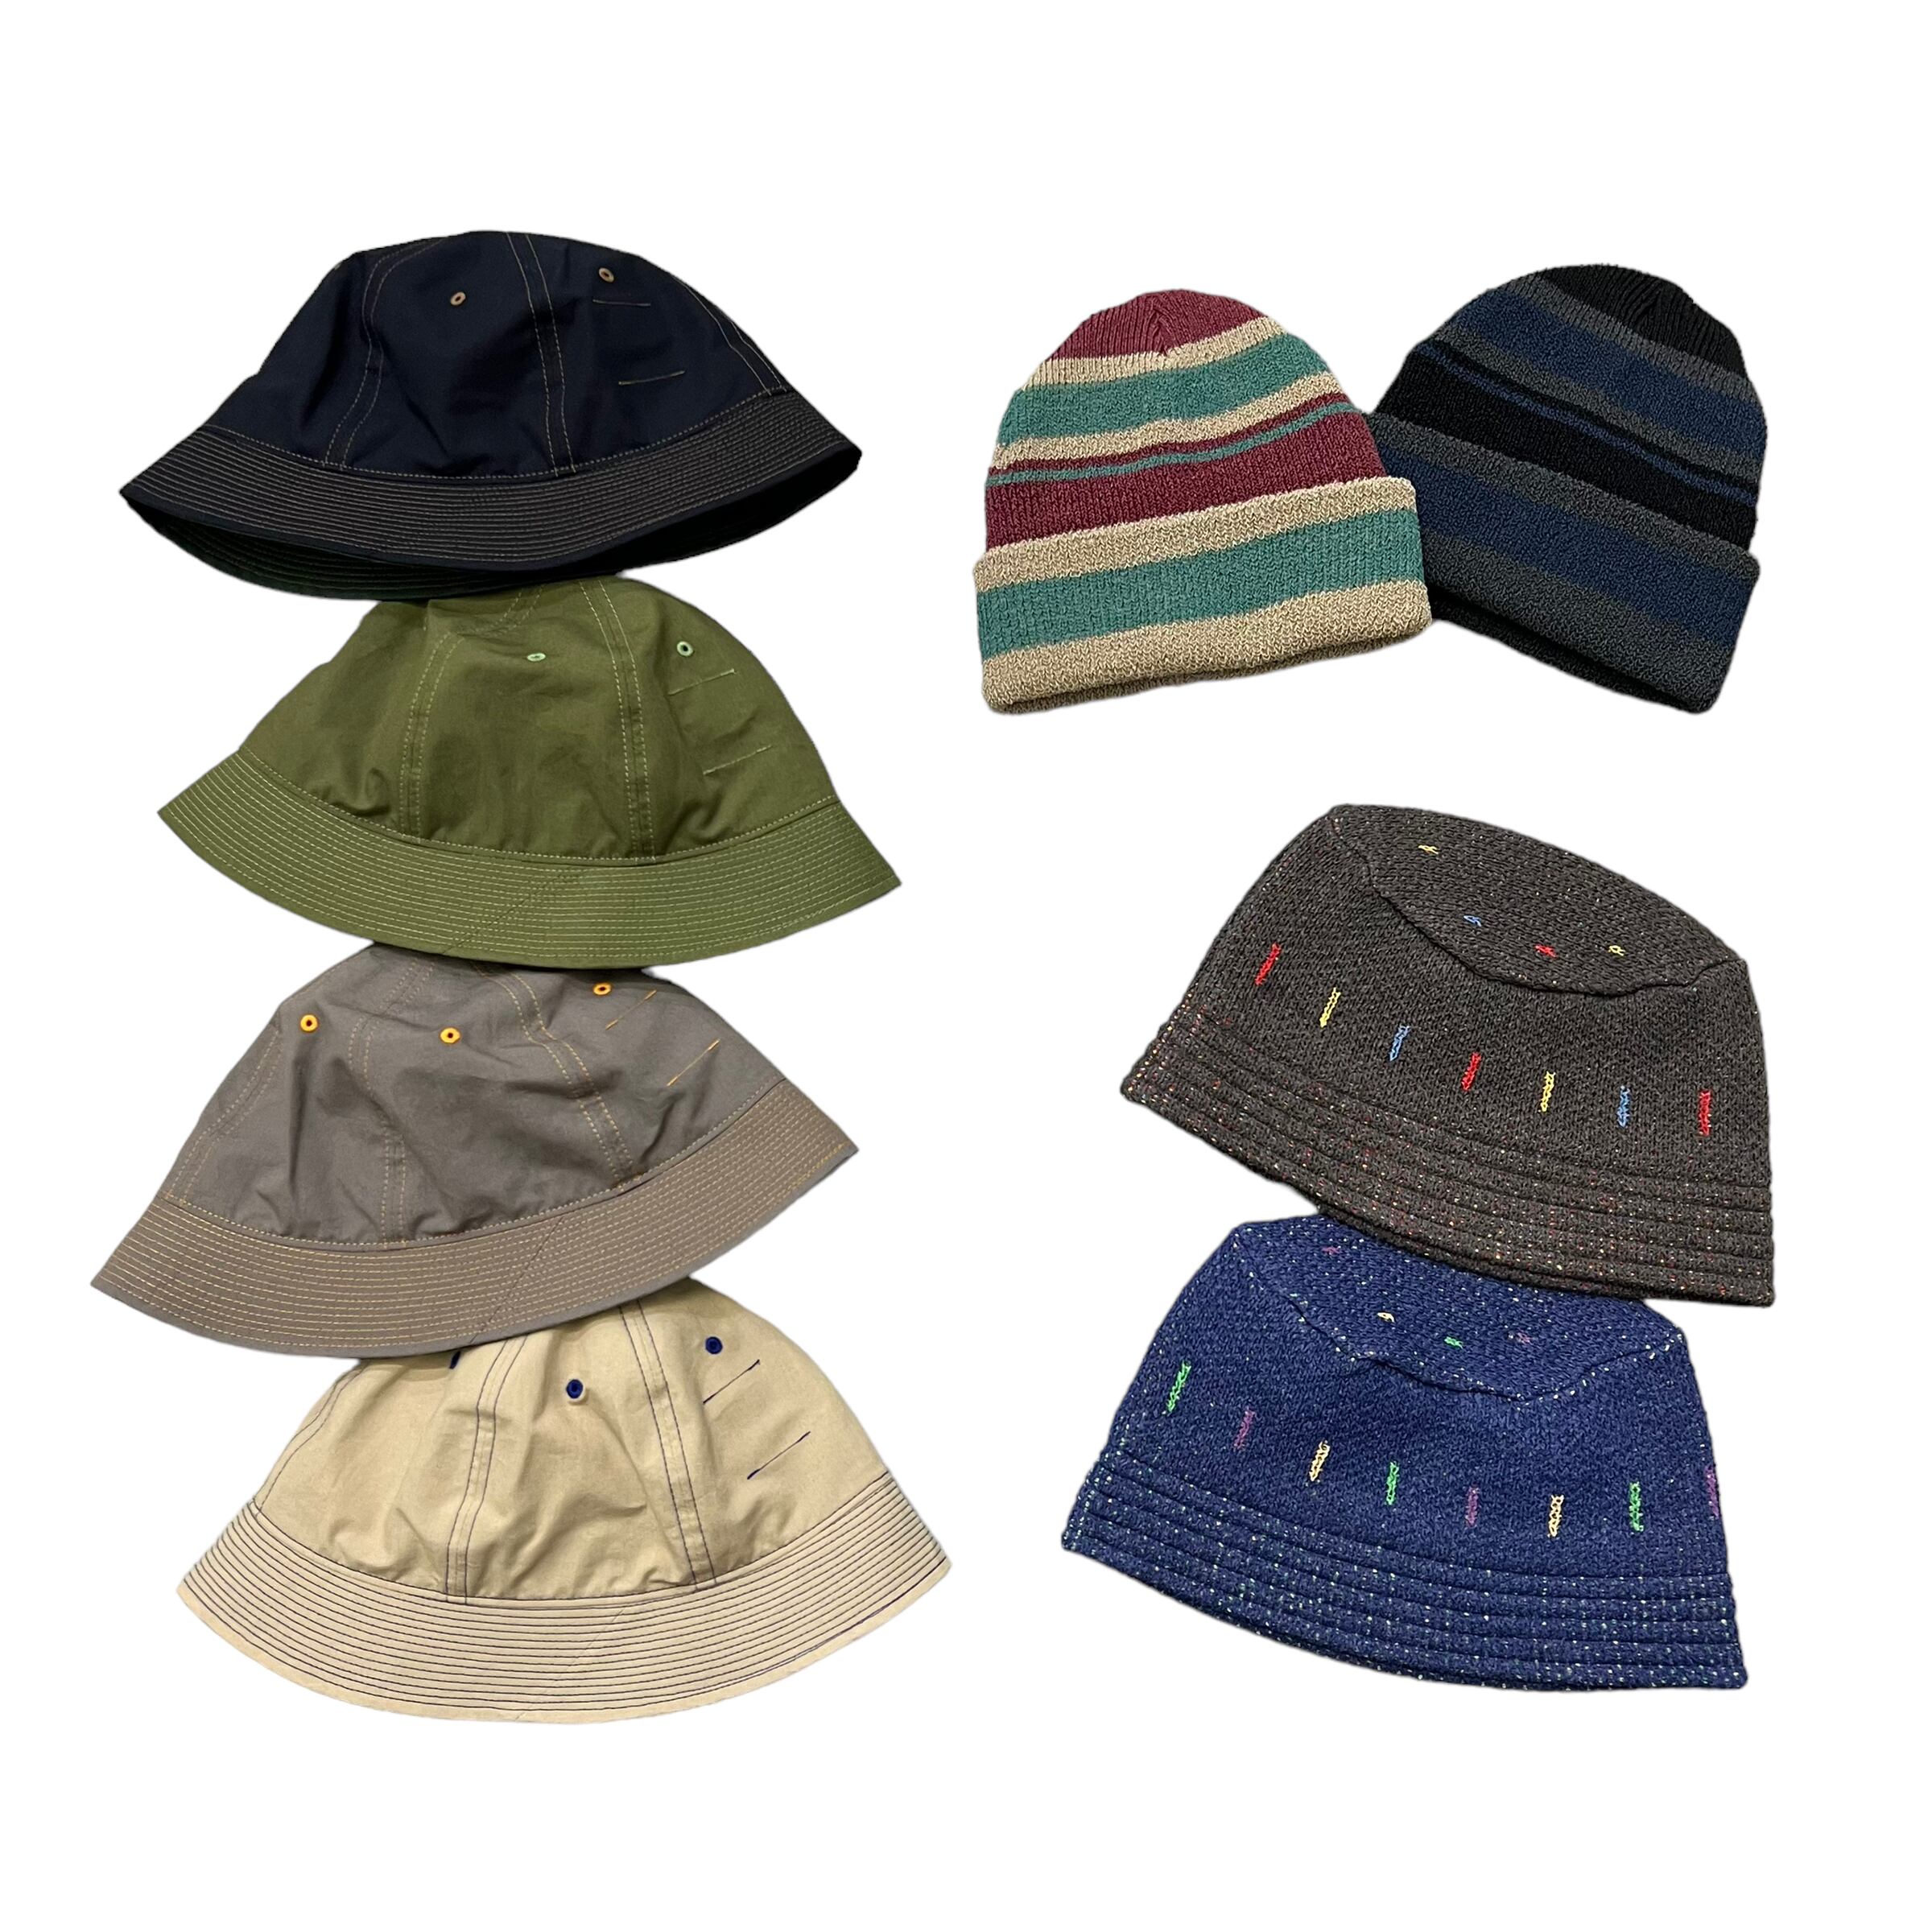 NOROLL / DETOURS WASHI HAT NAVY | THE NEWAGE CLUB powered by BASE